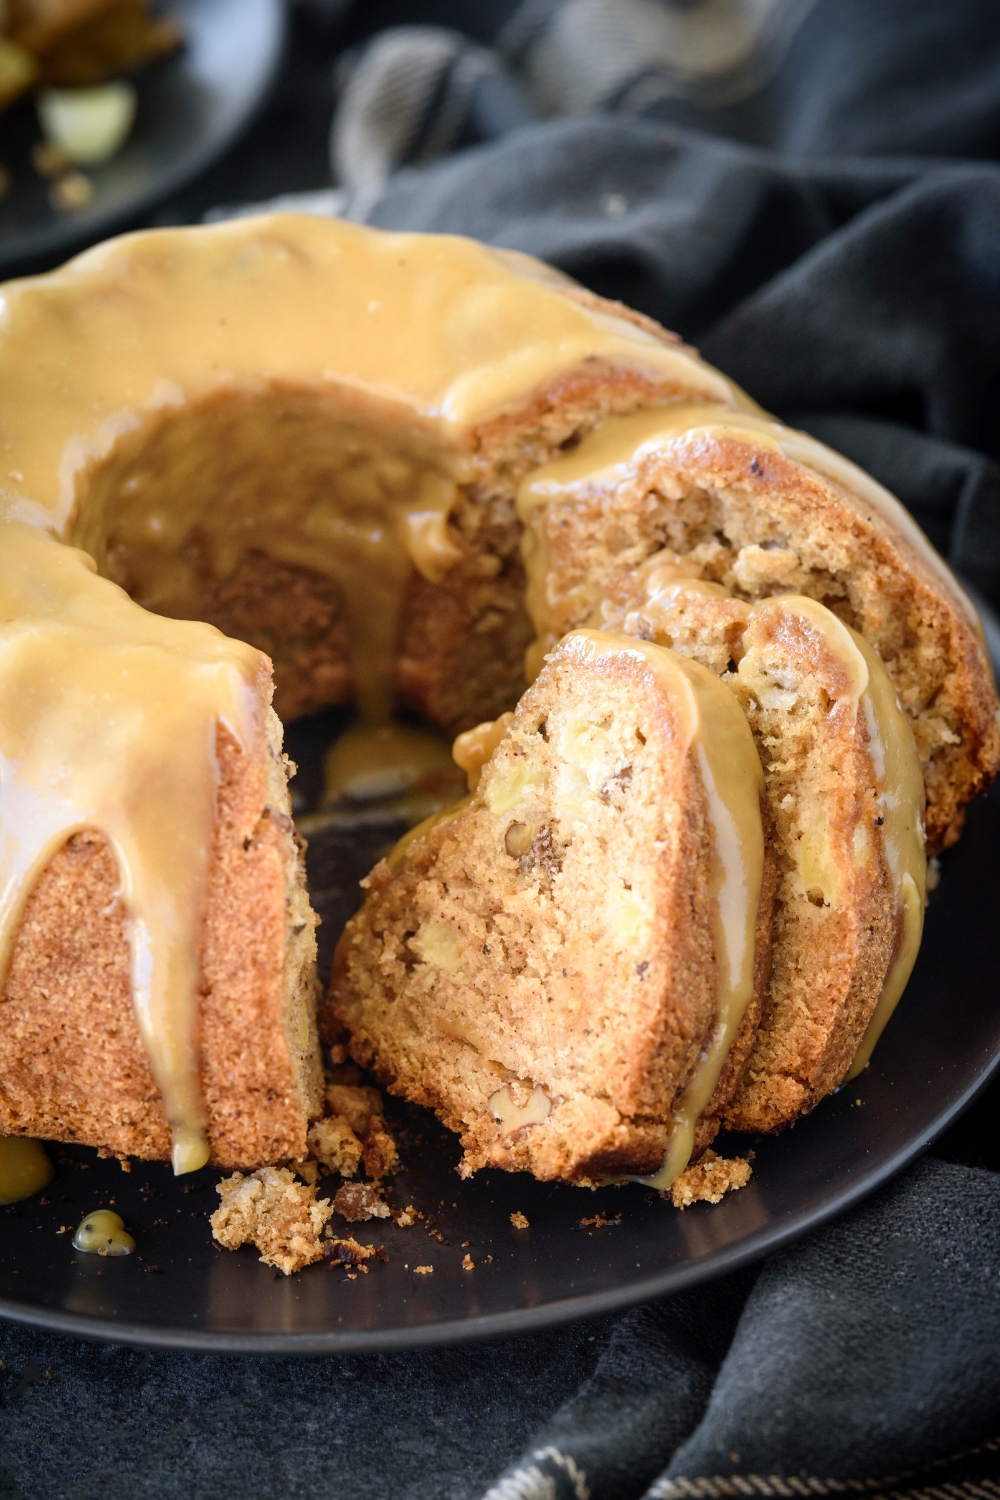 Bundt cake covered in caramel glaze and several slices have been cut from the cake and are resting against the cake.